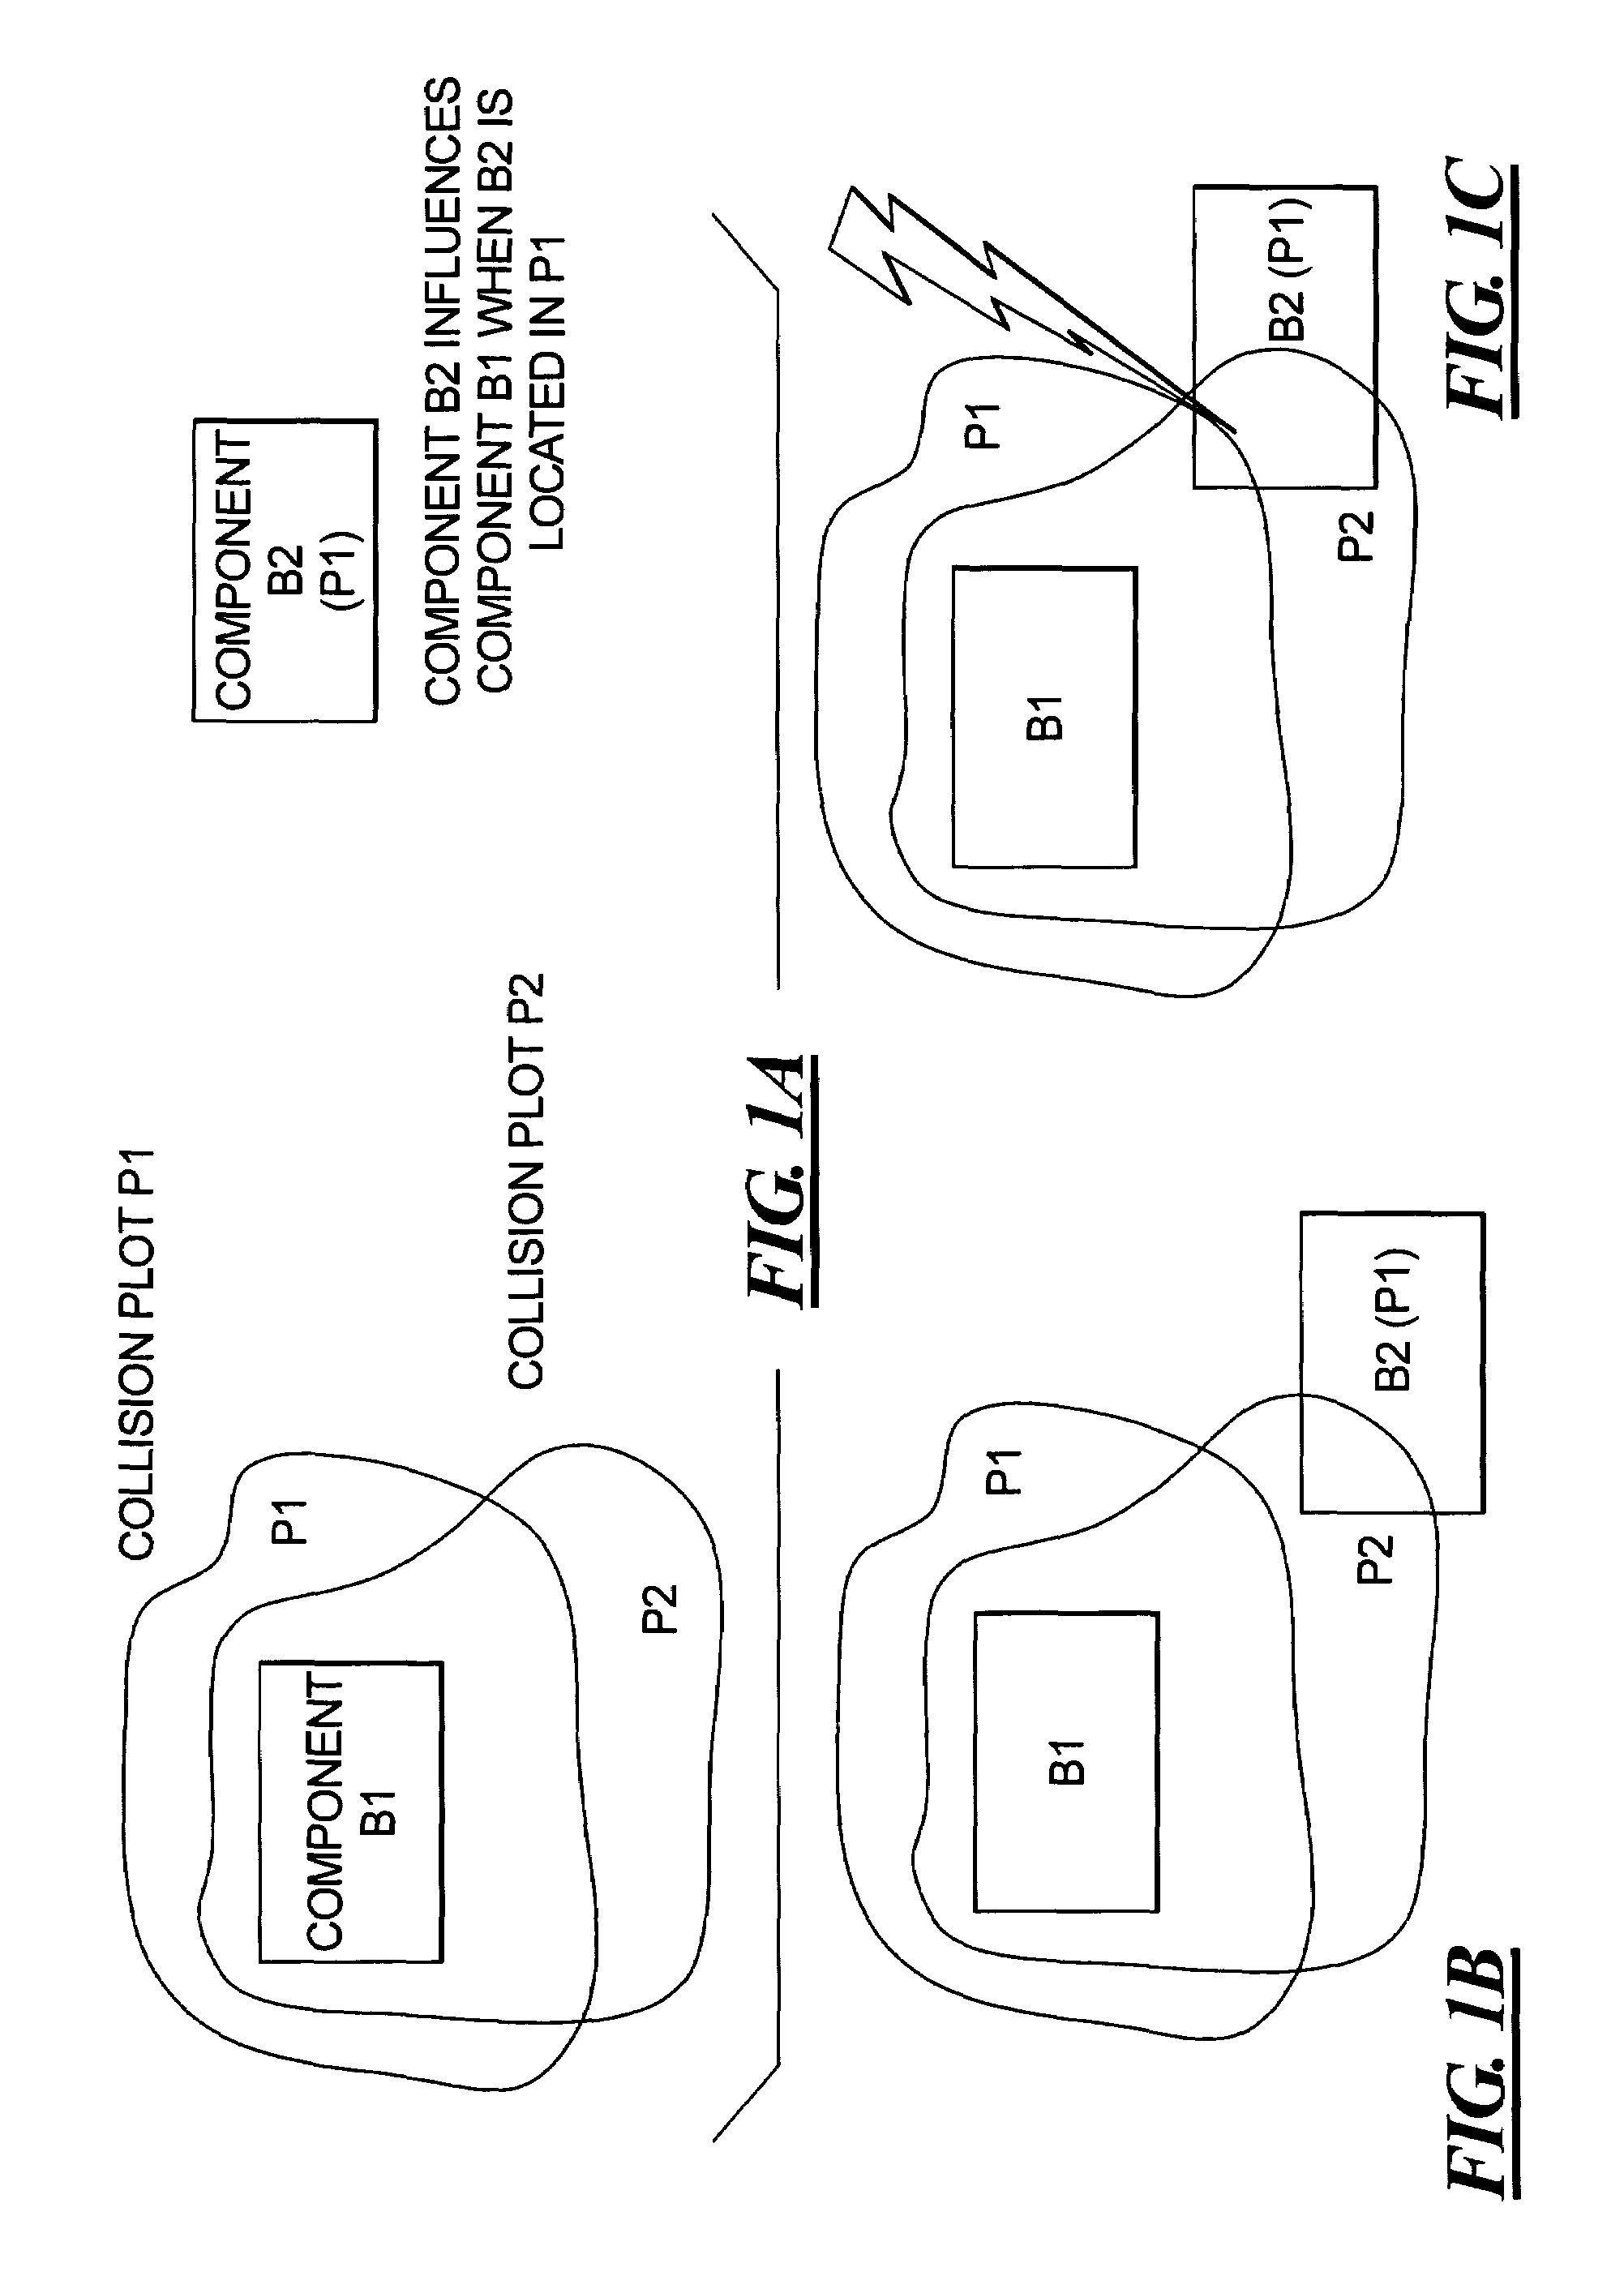 Computerized method for adherence to physical restriction in the construction of an ITE hearing aid